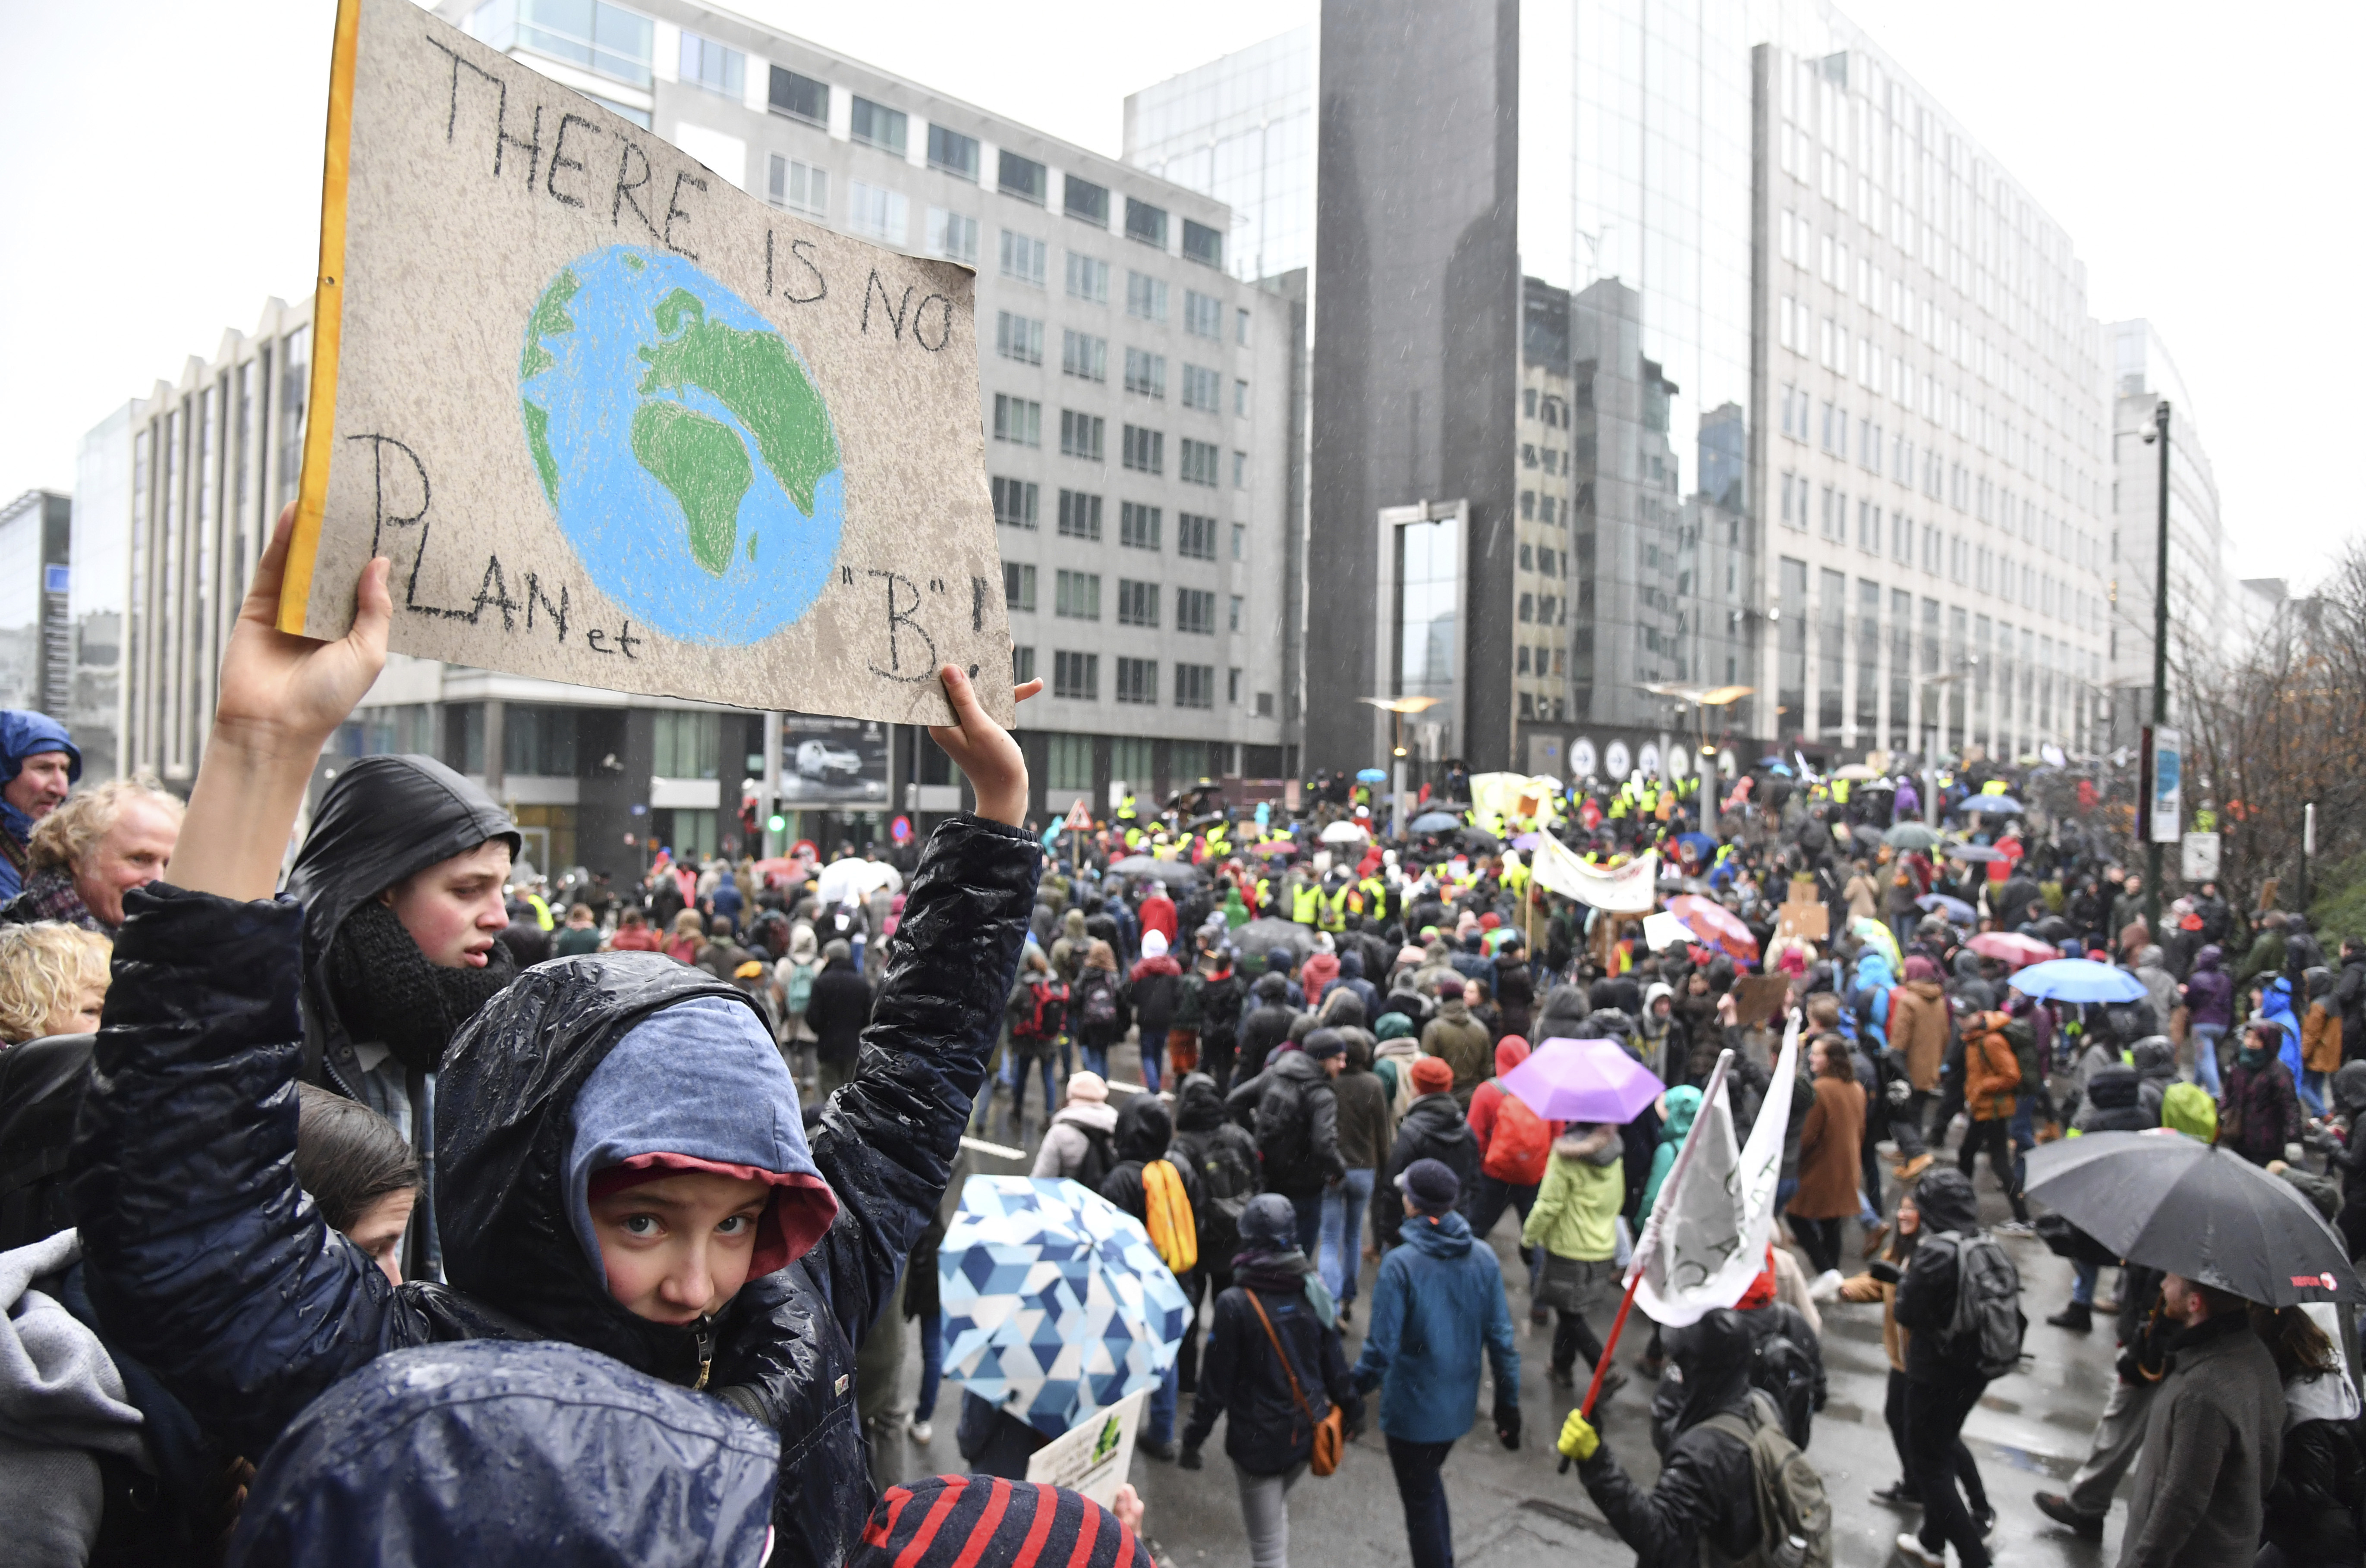 Protestors hold banners as they march during a Rise for the Climate demonstration in Brussels, Sunday, Jan. 27, 2019. (AP Photo/Geert Vanden Wijngaert)